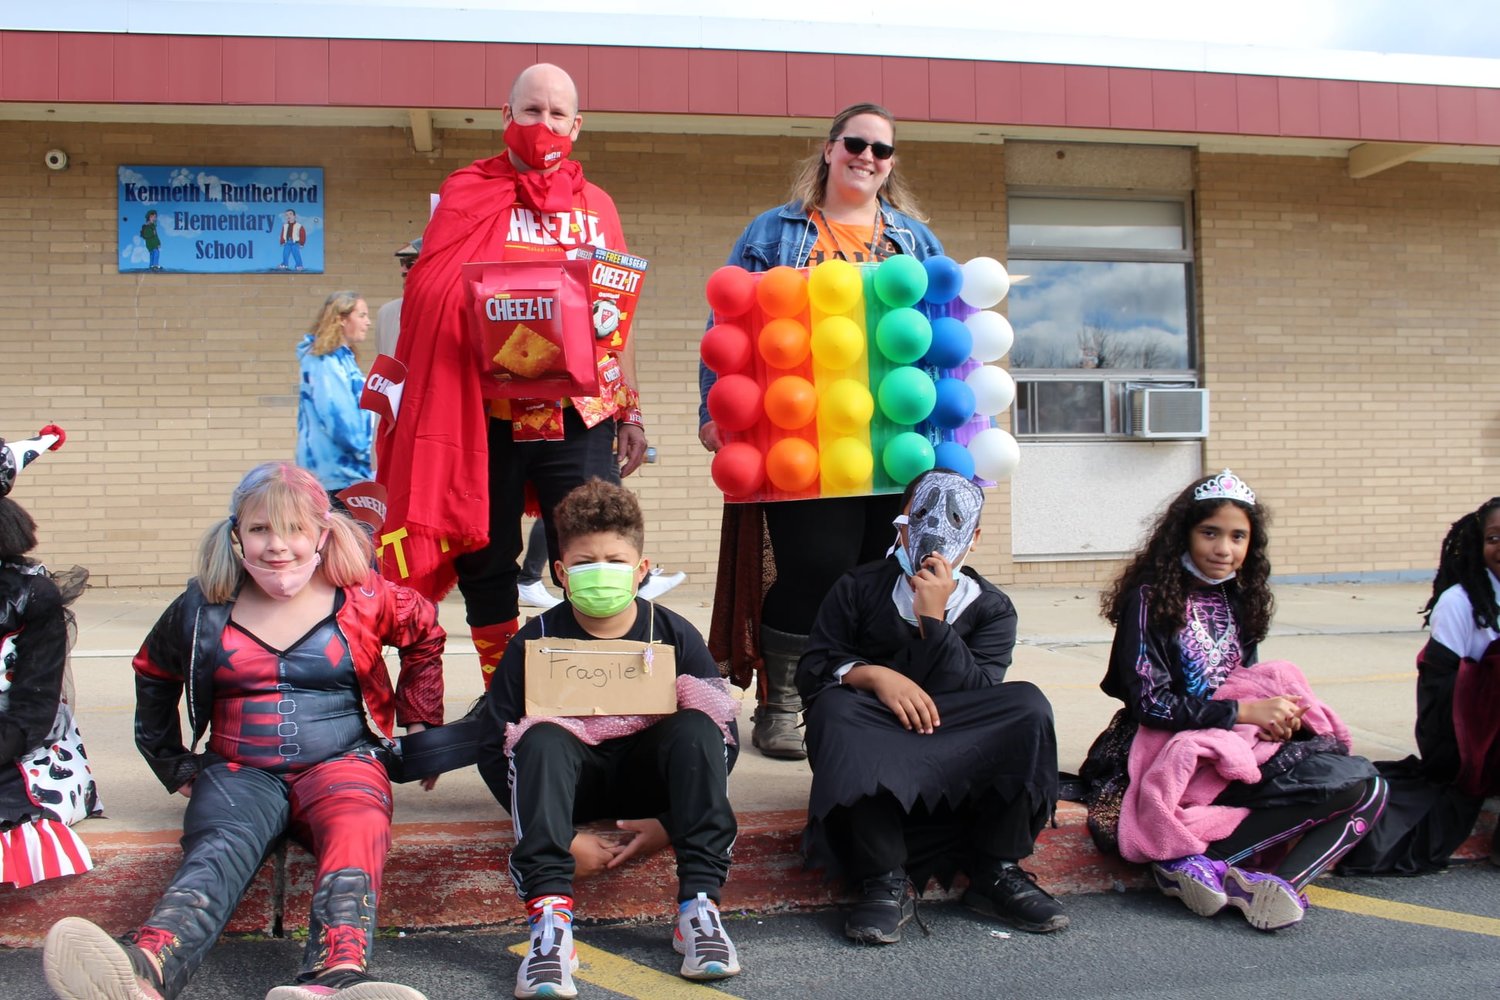 "Some students thought KLR teacher Dennis Lankau's costume was "cheesy" – but who doesn't love a Cheese-It cracker? Here he is flanked by Mrs. Elyssa Olsen in her colorful costume."